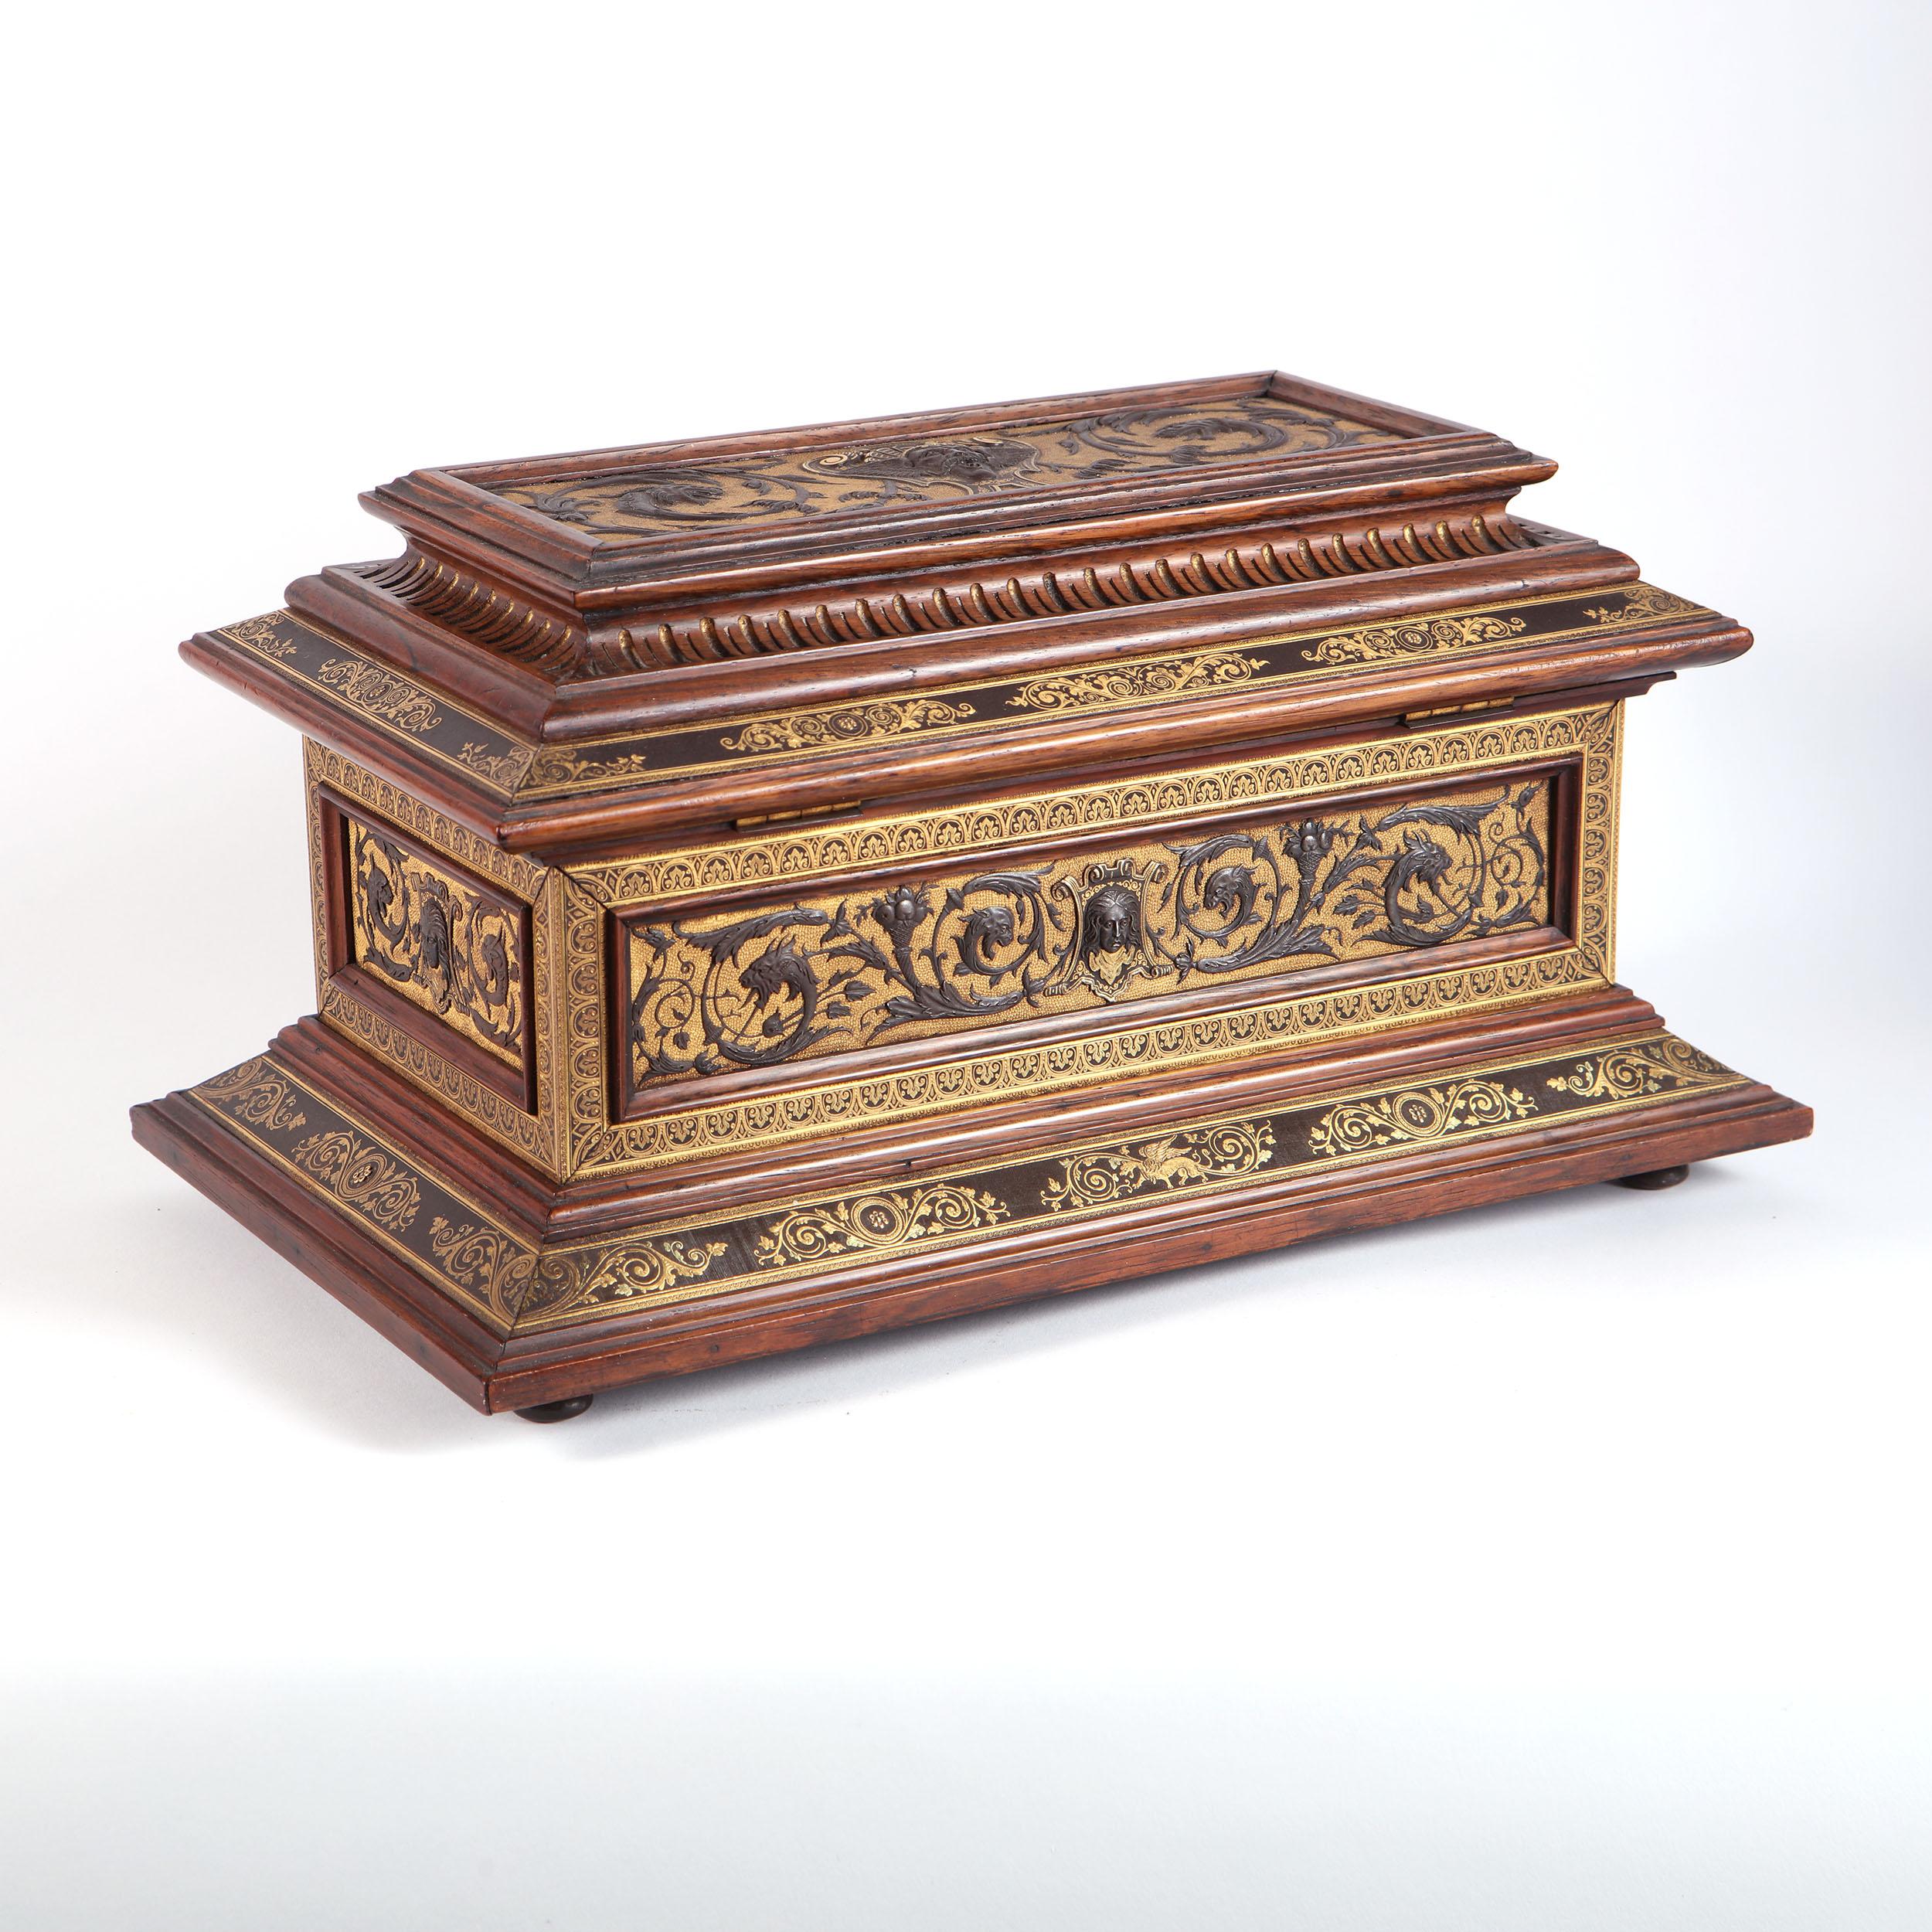 A magnificent Renaissance revival casket in the form of an Italian Cassone, this casket is based directly on another made by Plácido Zuloaga for Alfred Morrison, now known as the 'Fonthill Casket'. Our wooden casket is inset with five main panels of